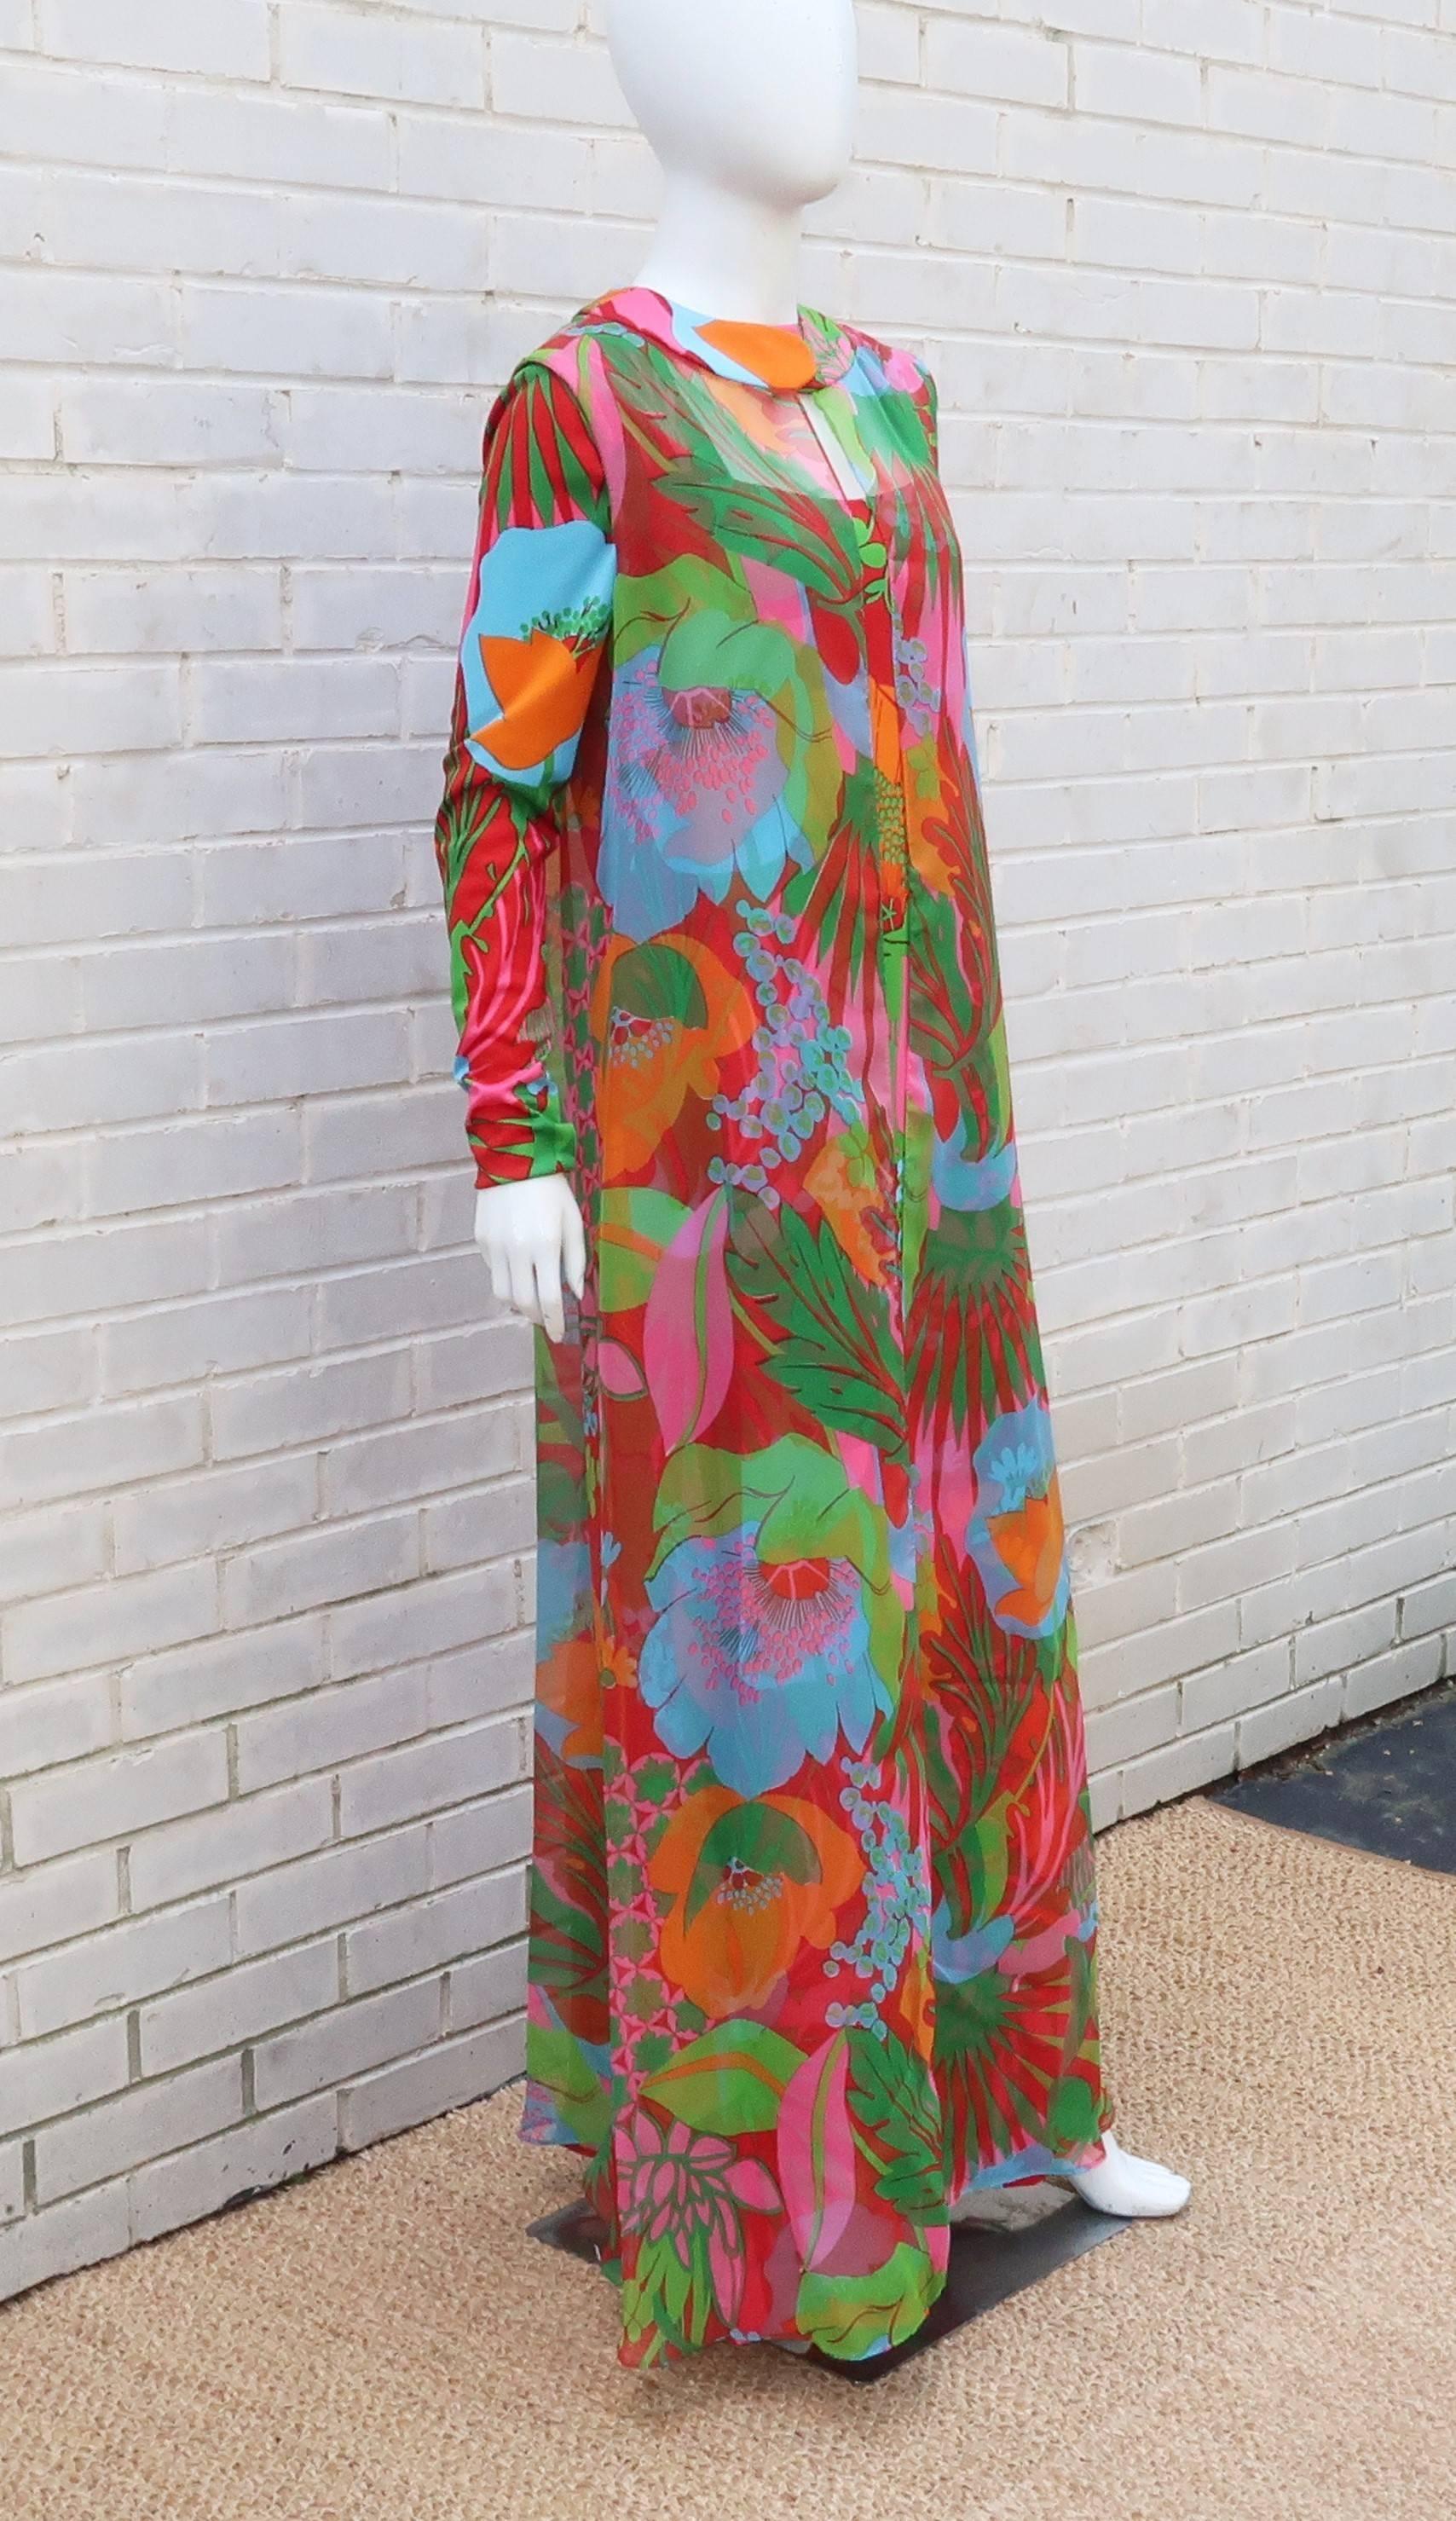 Don Luis de España was known for colorful prints and this mod 1960's two piece maxi dress is here to prove it!  The long tall silhouette is designed with a polyester jersey in red, orange, aqua and pink in a tropical style floral print.  The long